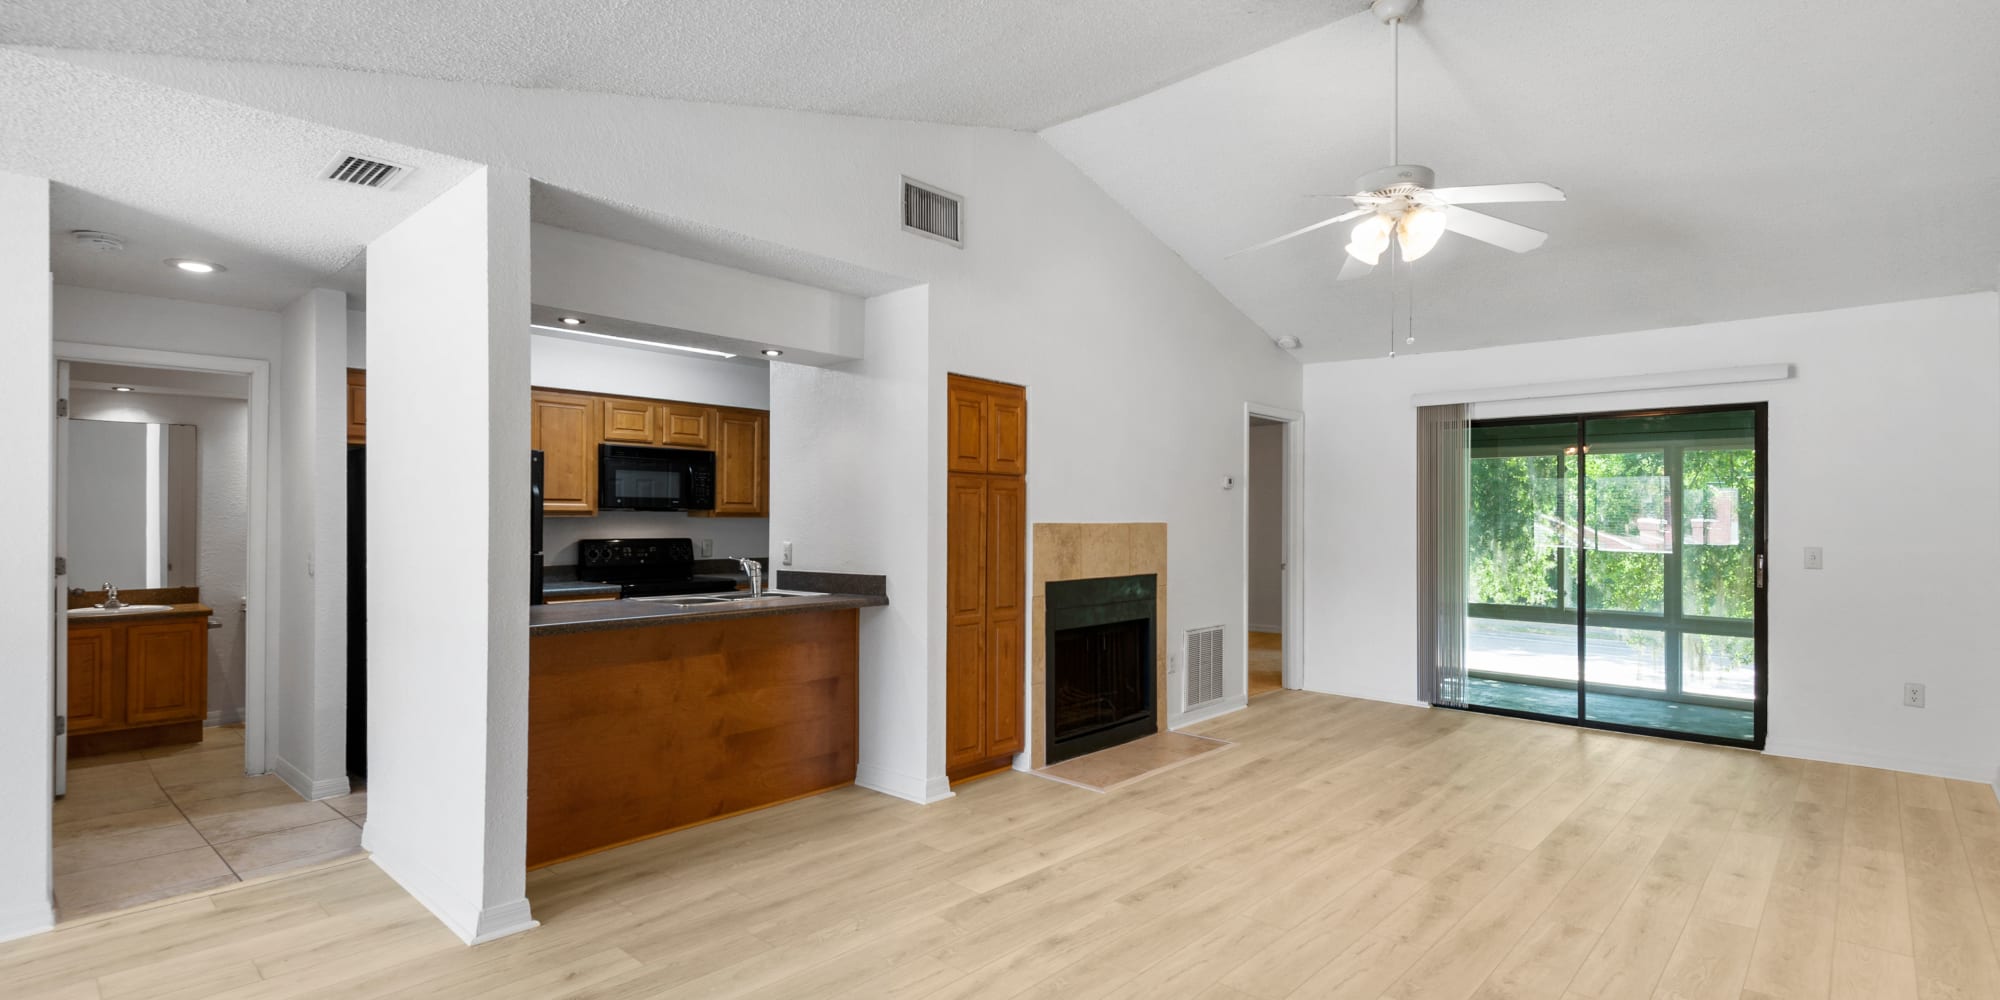 Apartment with wood-style flooring at Stone Creek at Wekiva in Altamonte Springs, Florida